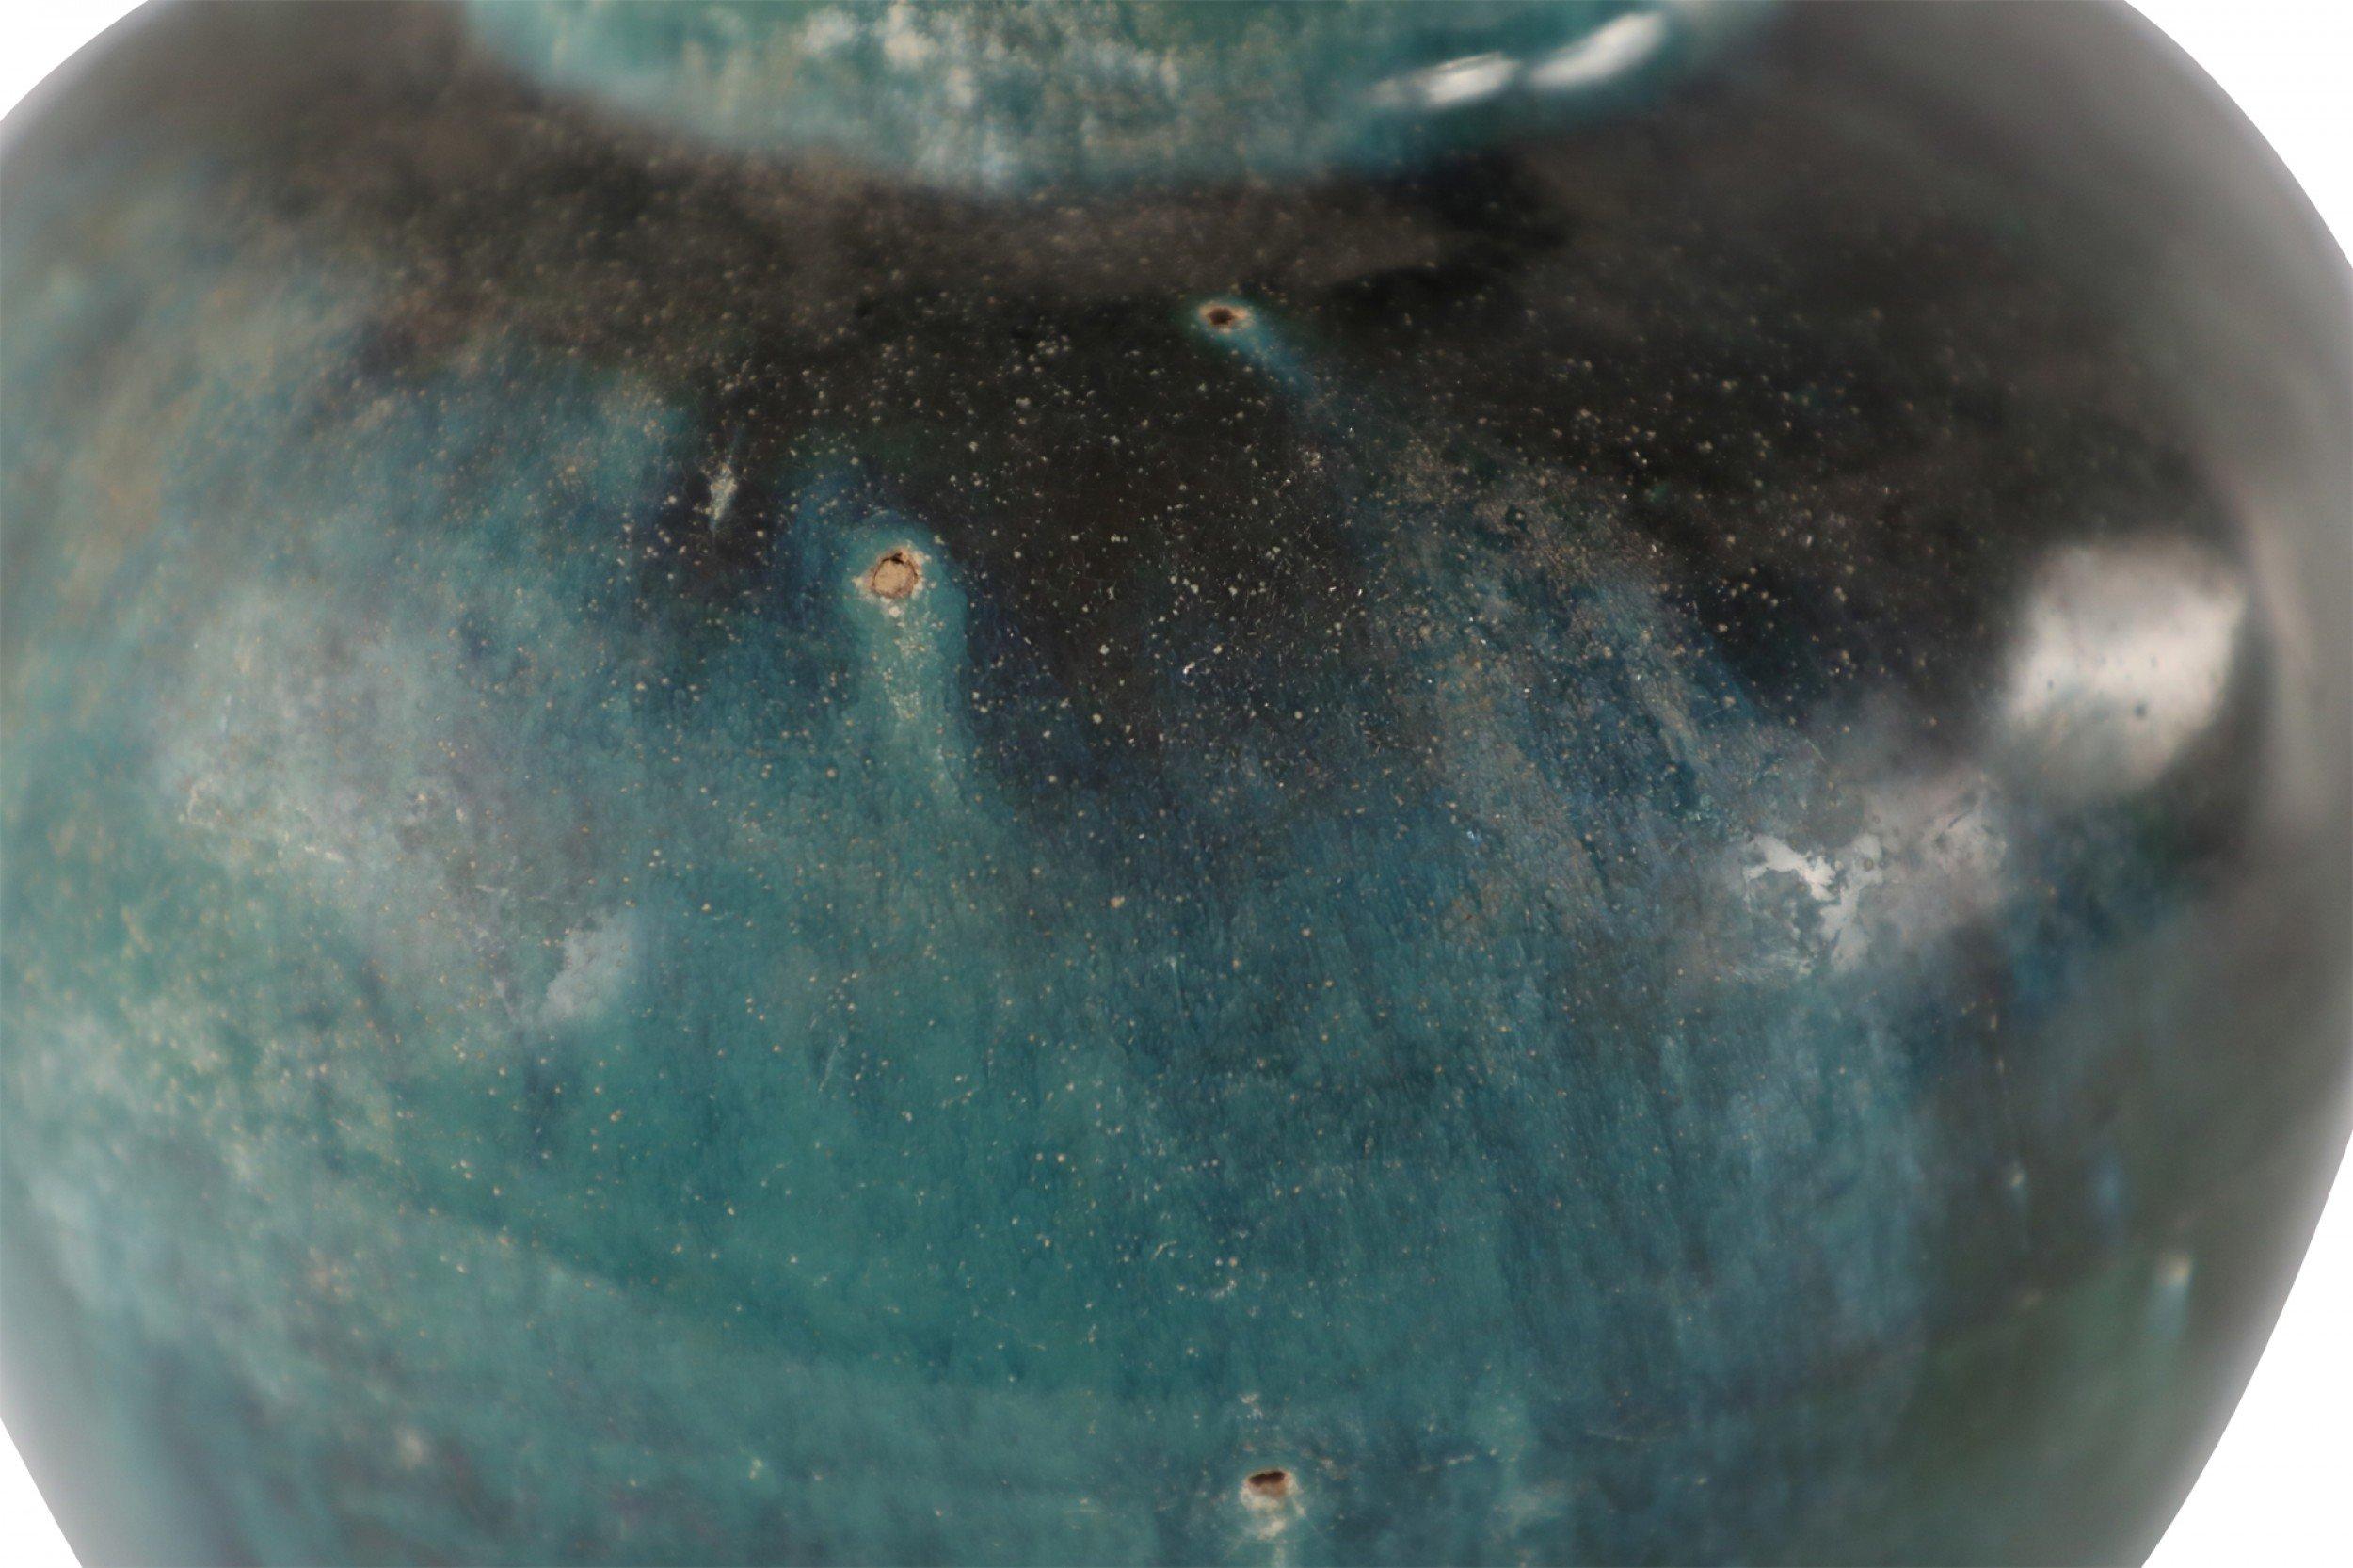 Chinese porcelain vase with a bulbous form and painterly, shifting finish revealing multiple shades of teal, green, and umber.
 